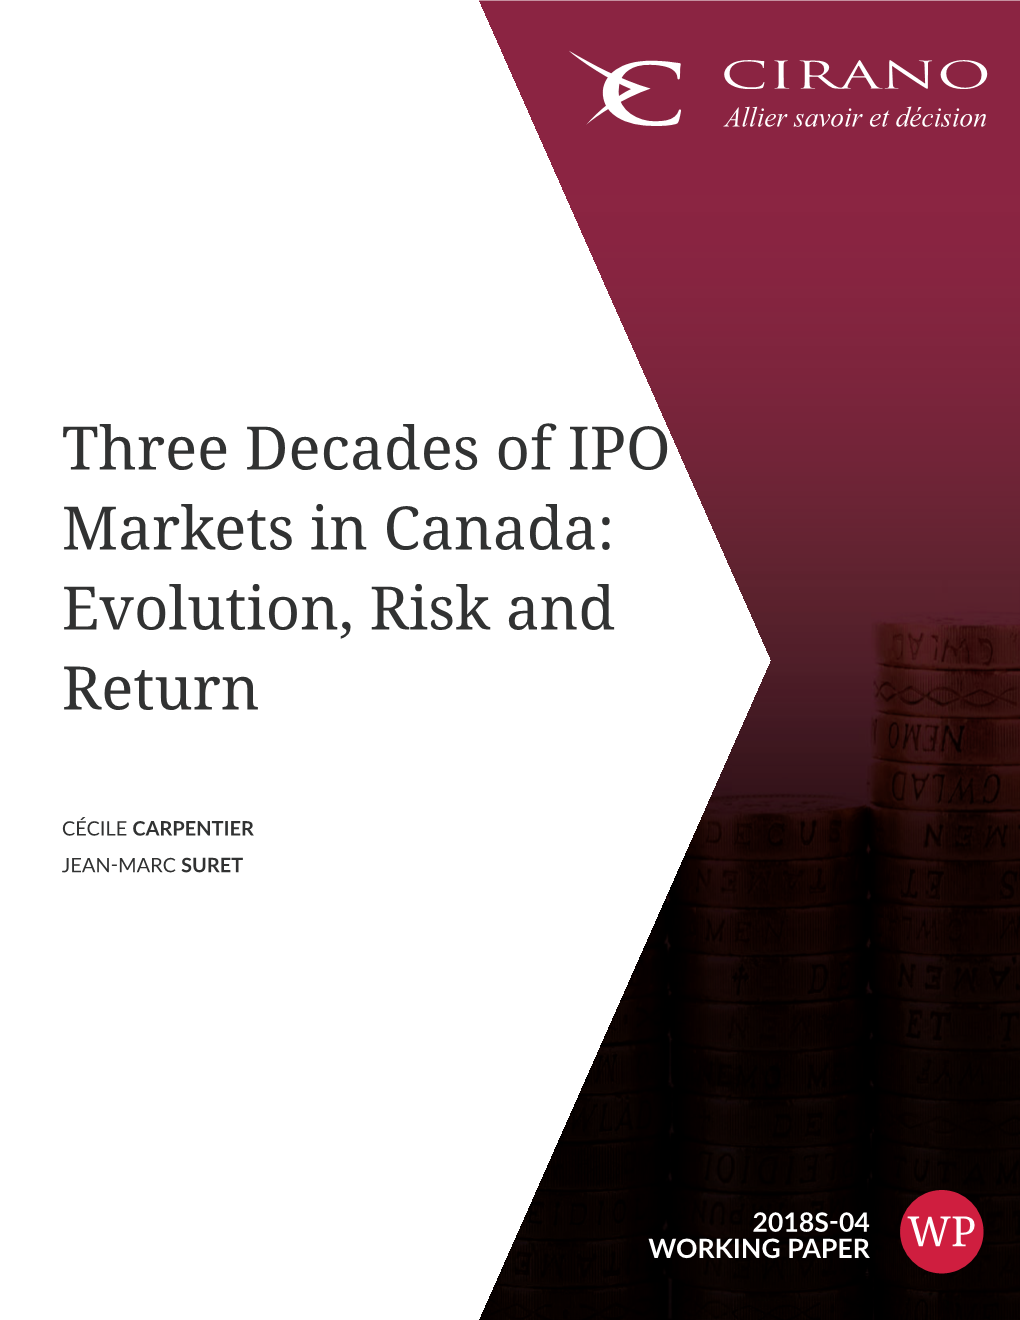 Three Decades of IPO Markets in Canada: Evolution, Risk and Return